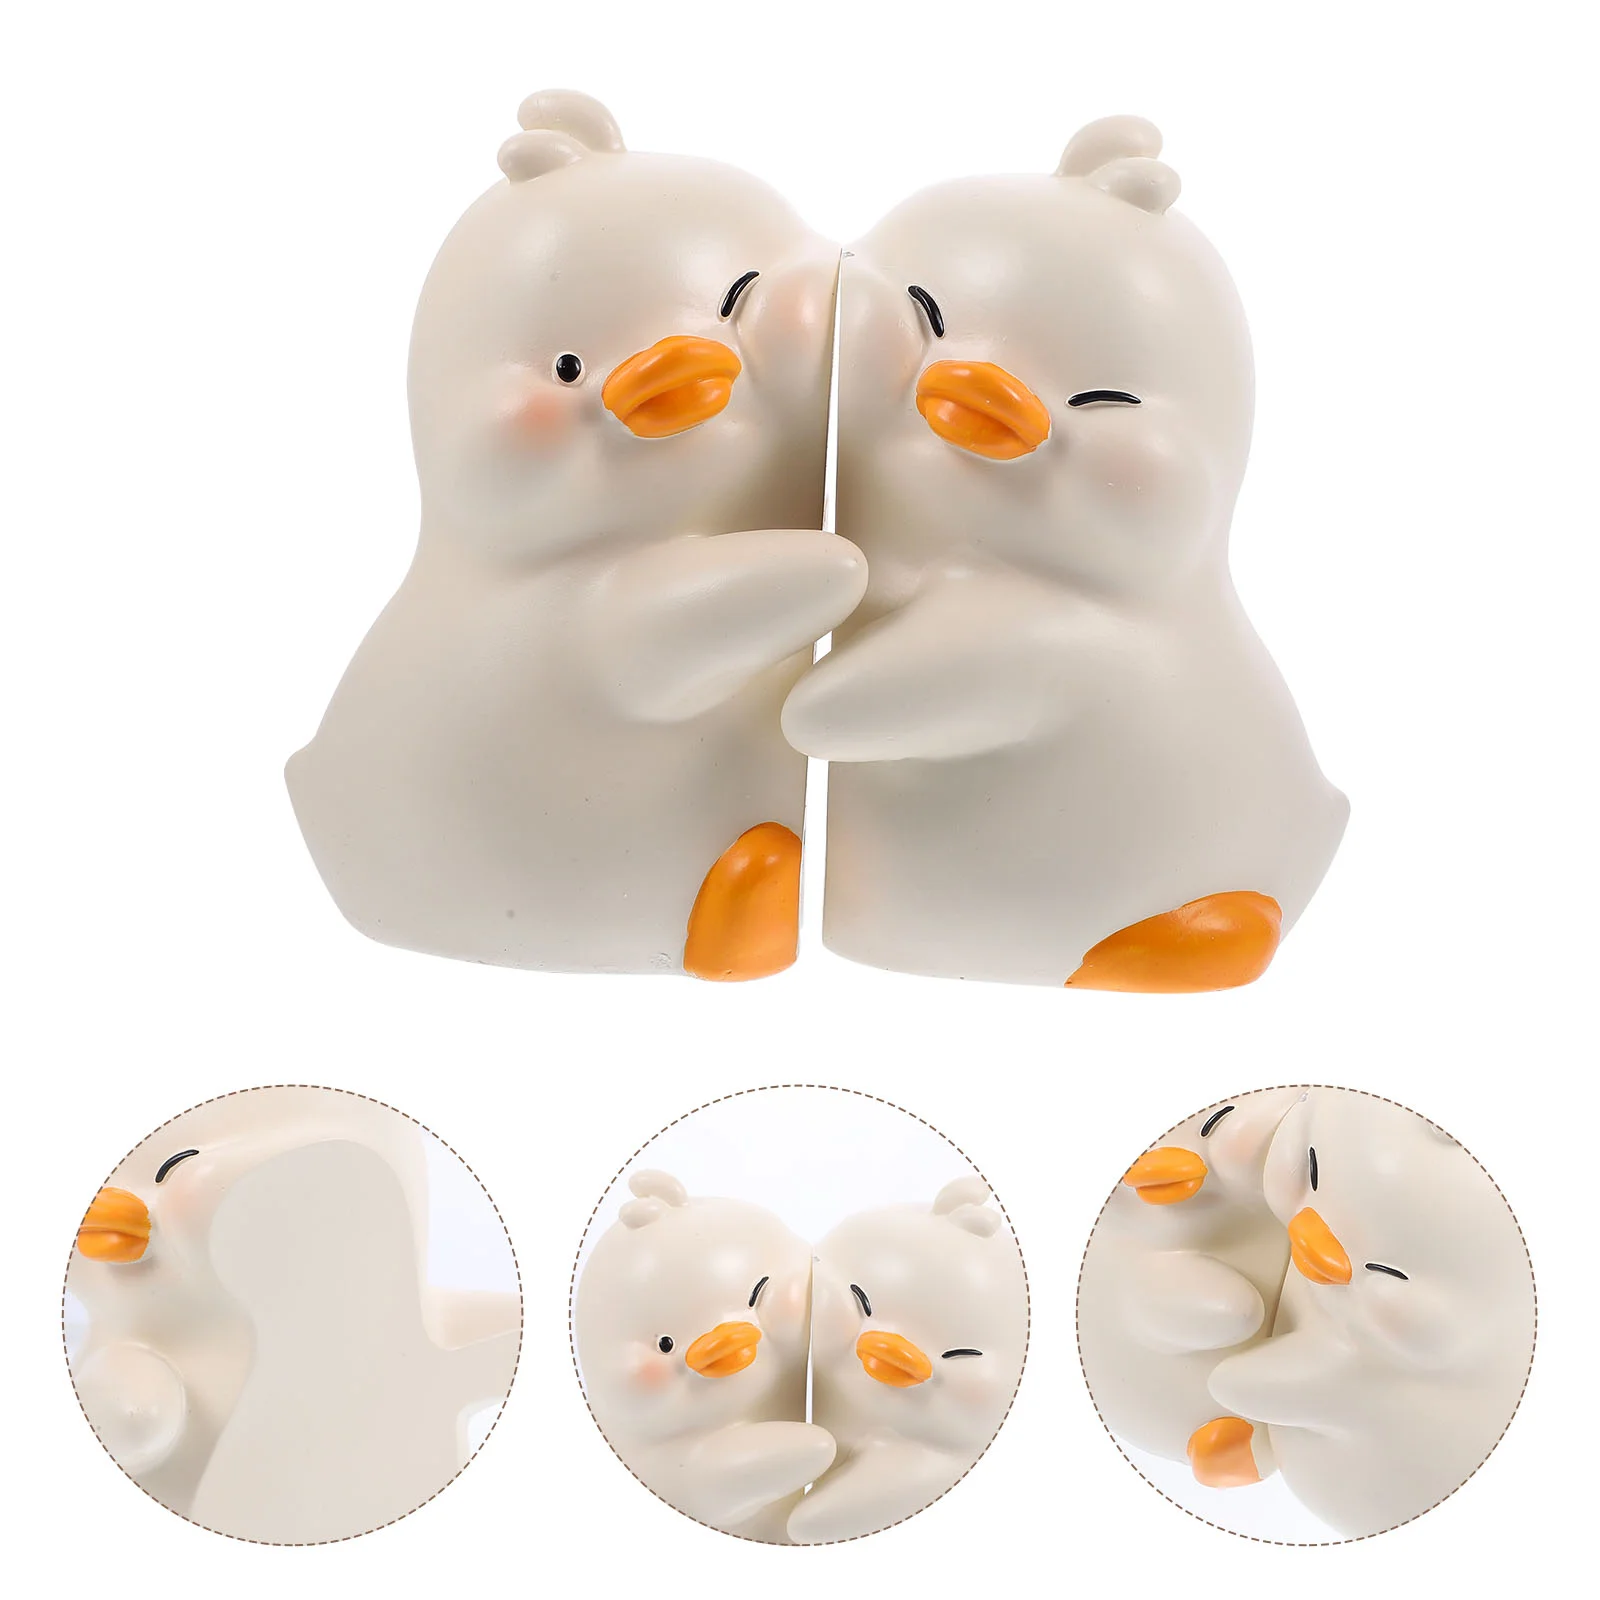 1 Pair Cute Hug Ducks Decorative Bookend Resin Book Holder Stopper for Home Office Desk 1 pair decorative book shelf bookends golden man pushing book support book stopper ornaments resin craft for home cabinet